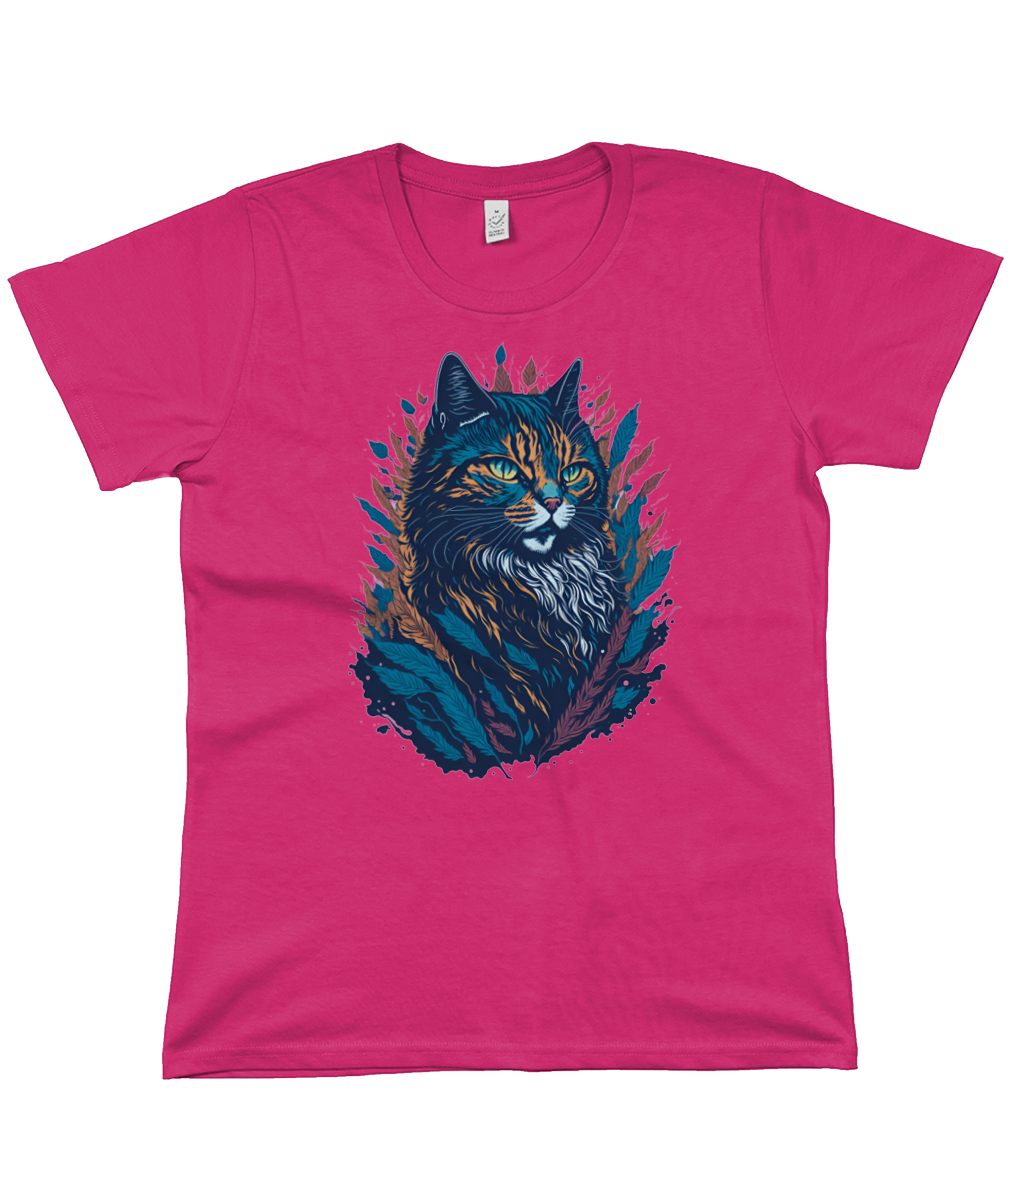 Fans of Catastic "Stealth Sapphire" Classic Jersey Women's T-Shirt